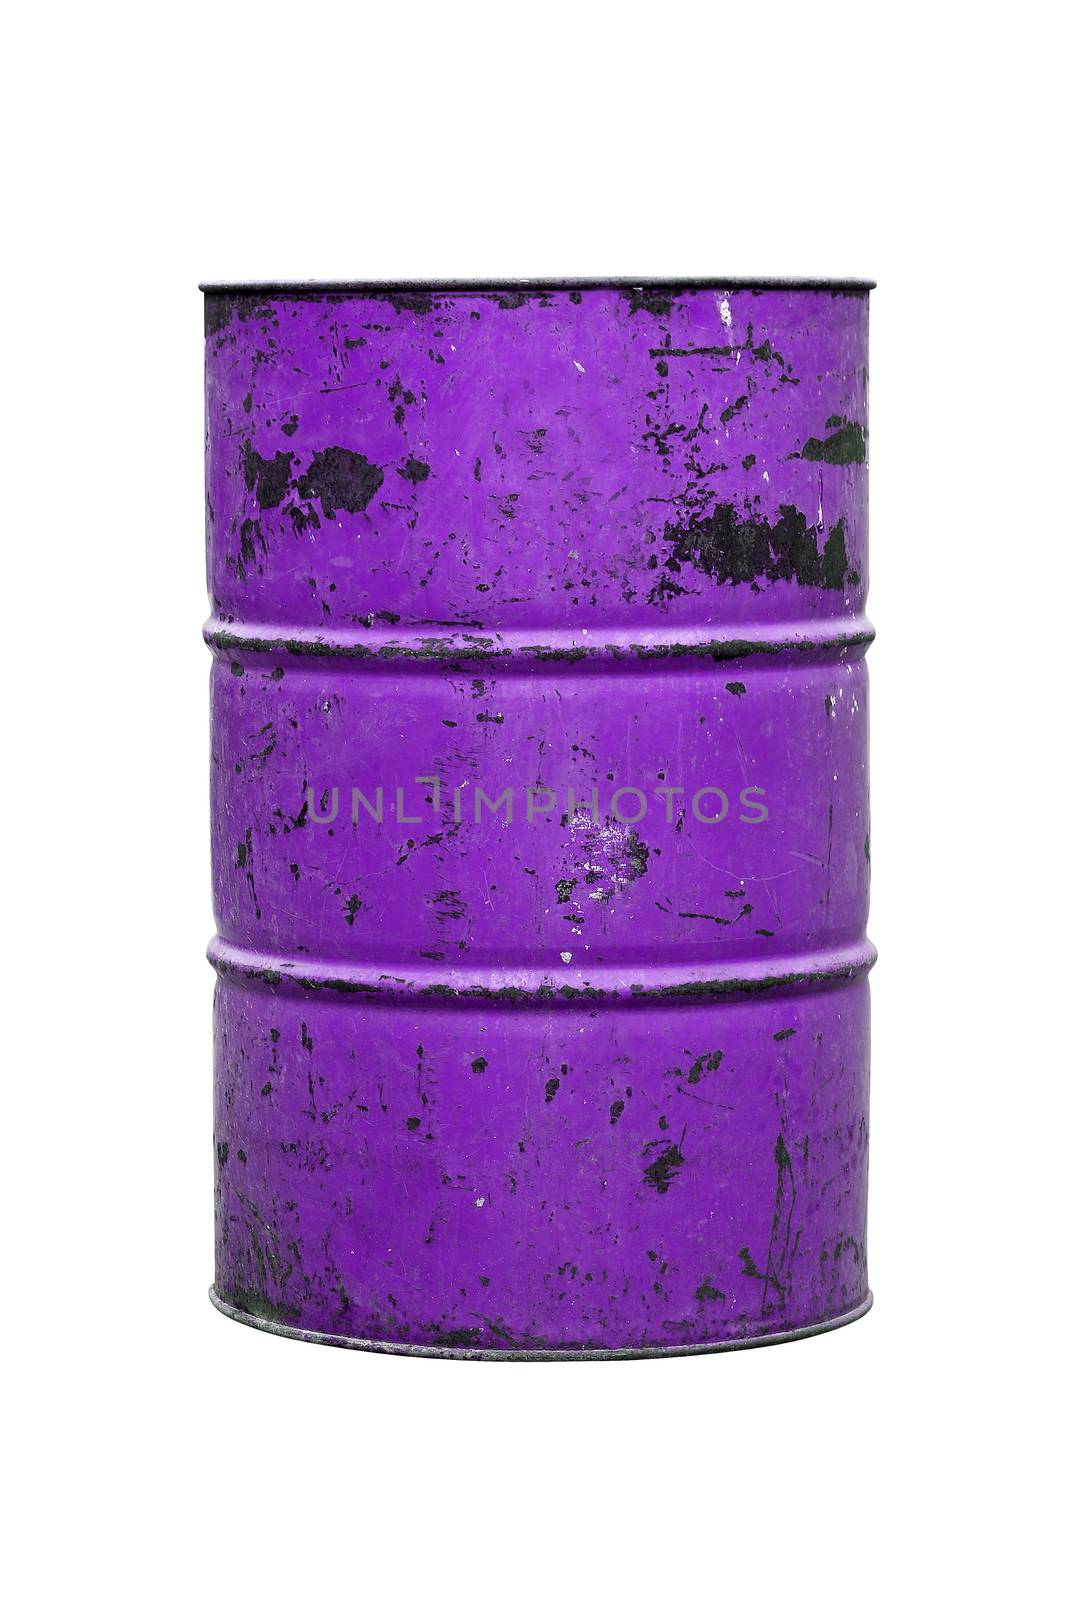 Barrel Oil purple Old isolated on background white